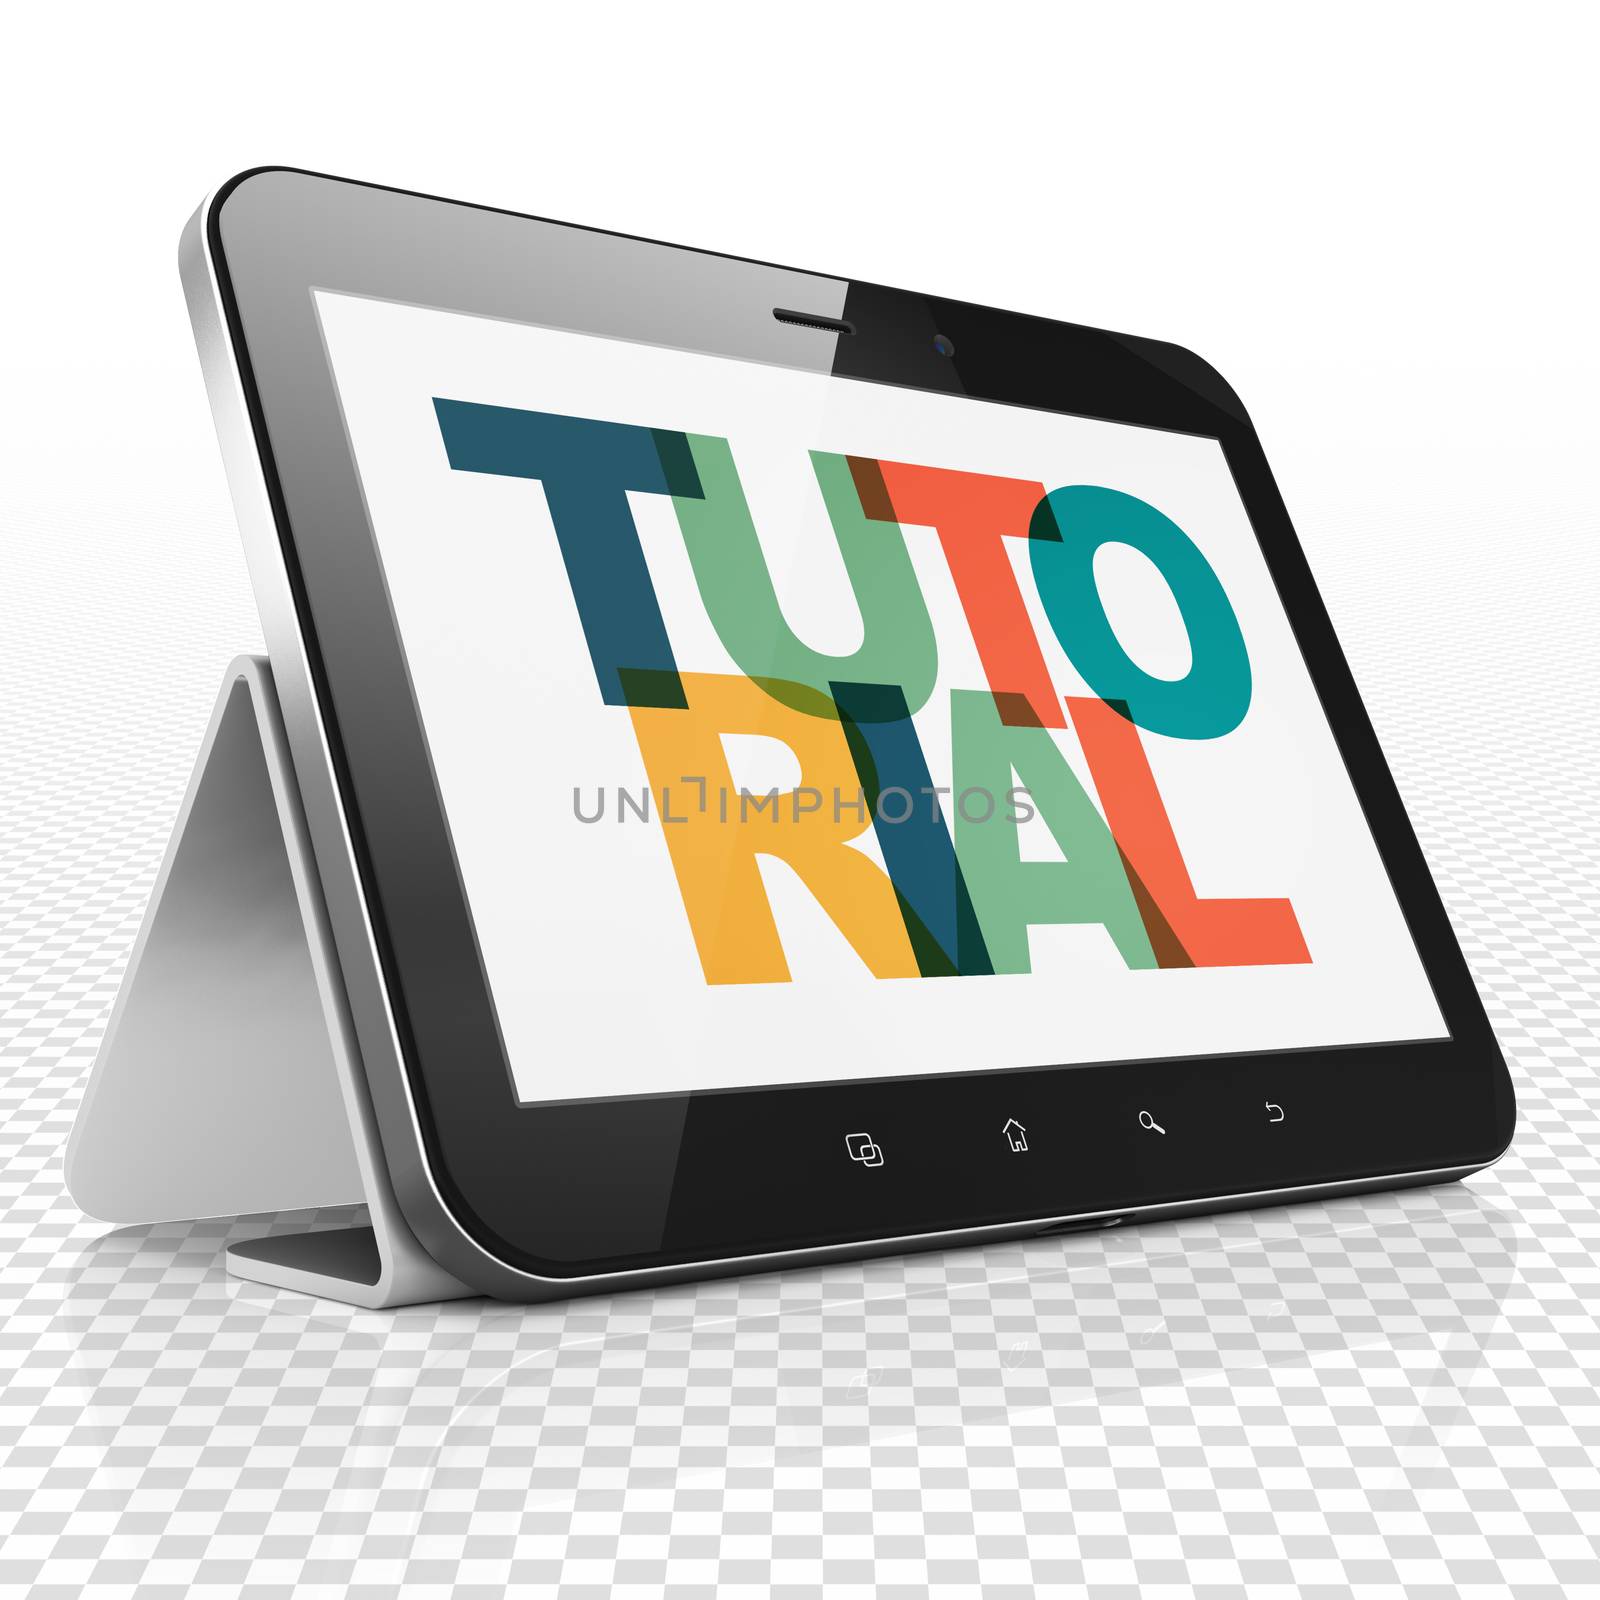 Learning concept: Tablet Computer with Painted multicolor text Tutorial on display, 3D rendering